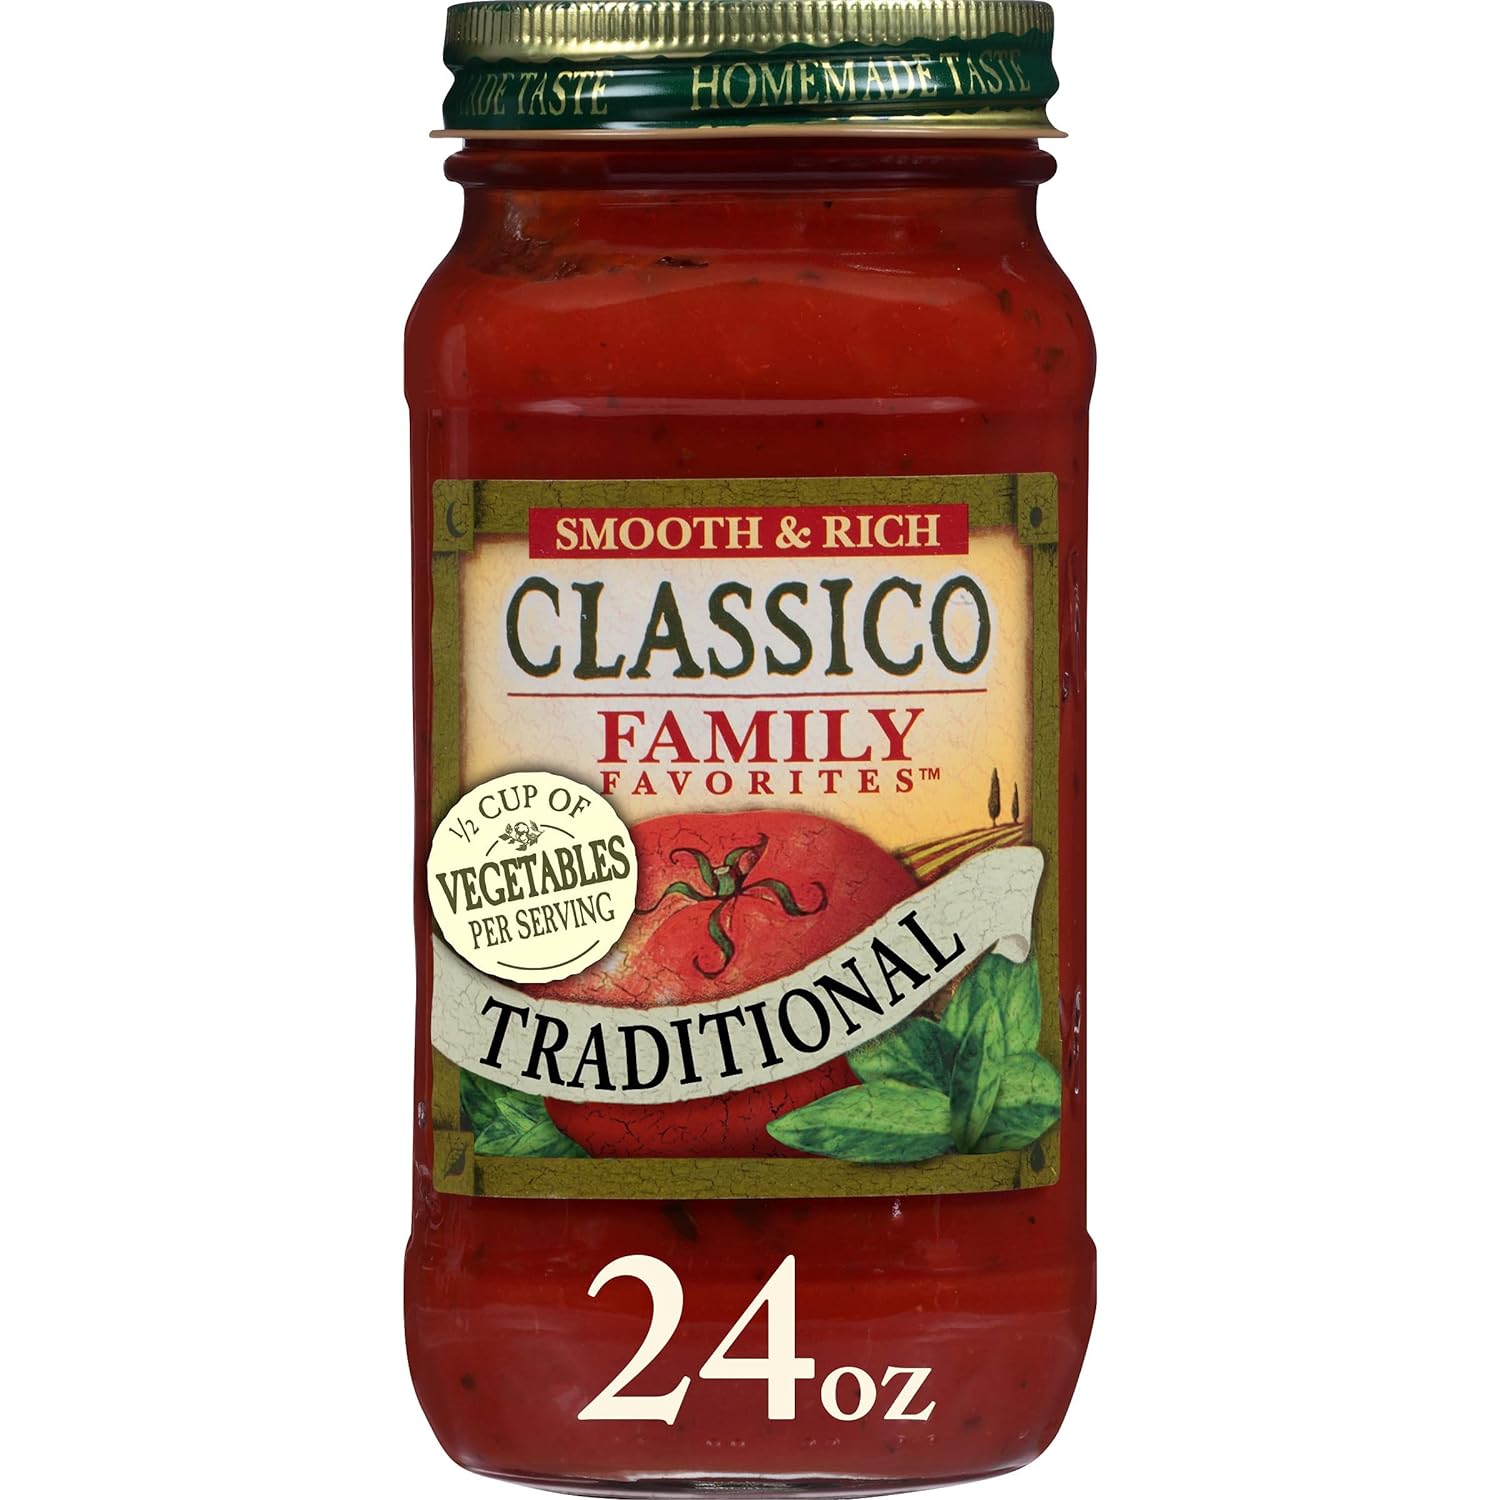 24-Oz Classico Family Favorites Traditional Pasta Sauce $2.05 w/ S&S + Free Shipping w/ Prime or on orders over $35